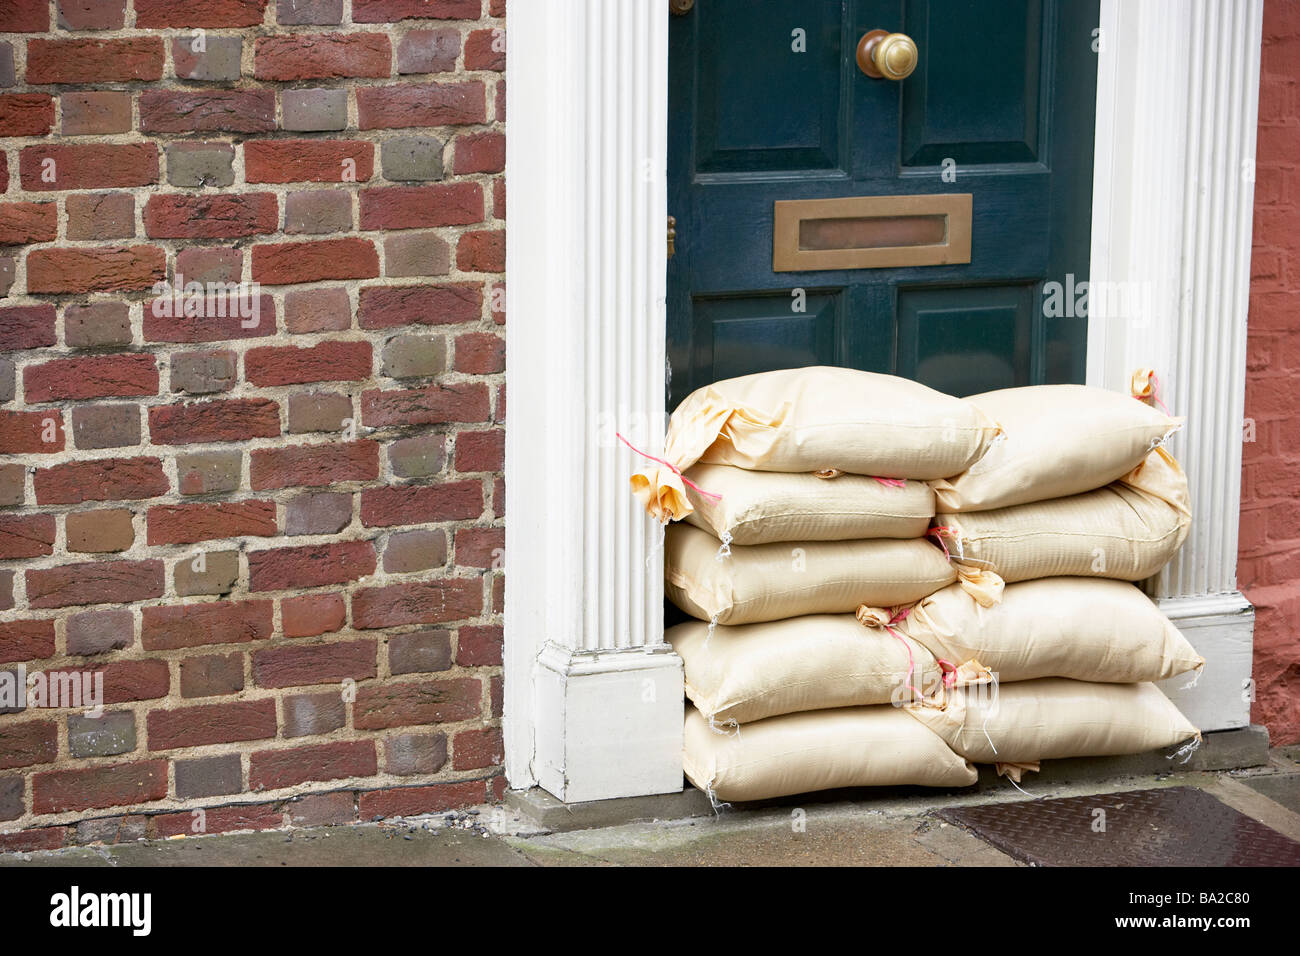 Sandbags Stacked In A Doorway In Preparation For Flooding Stock Photo